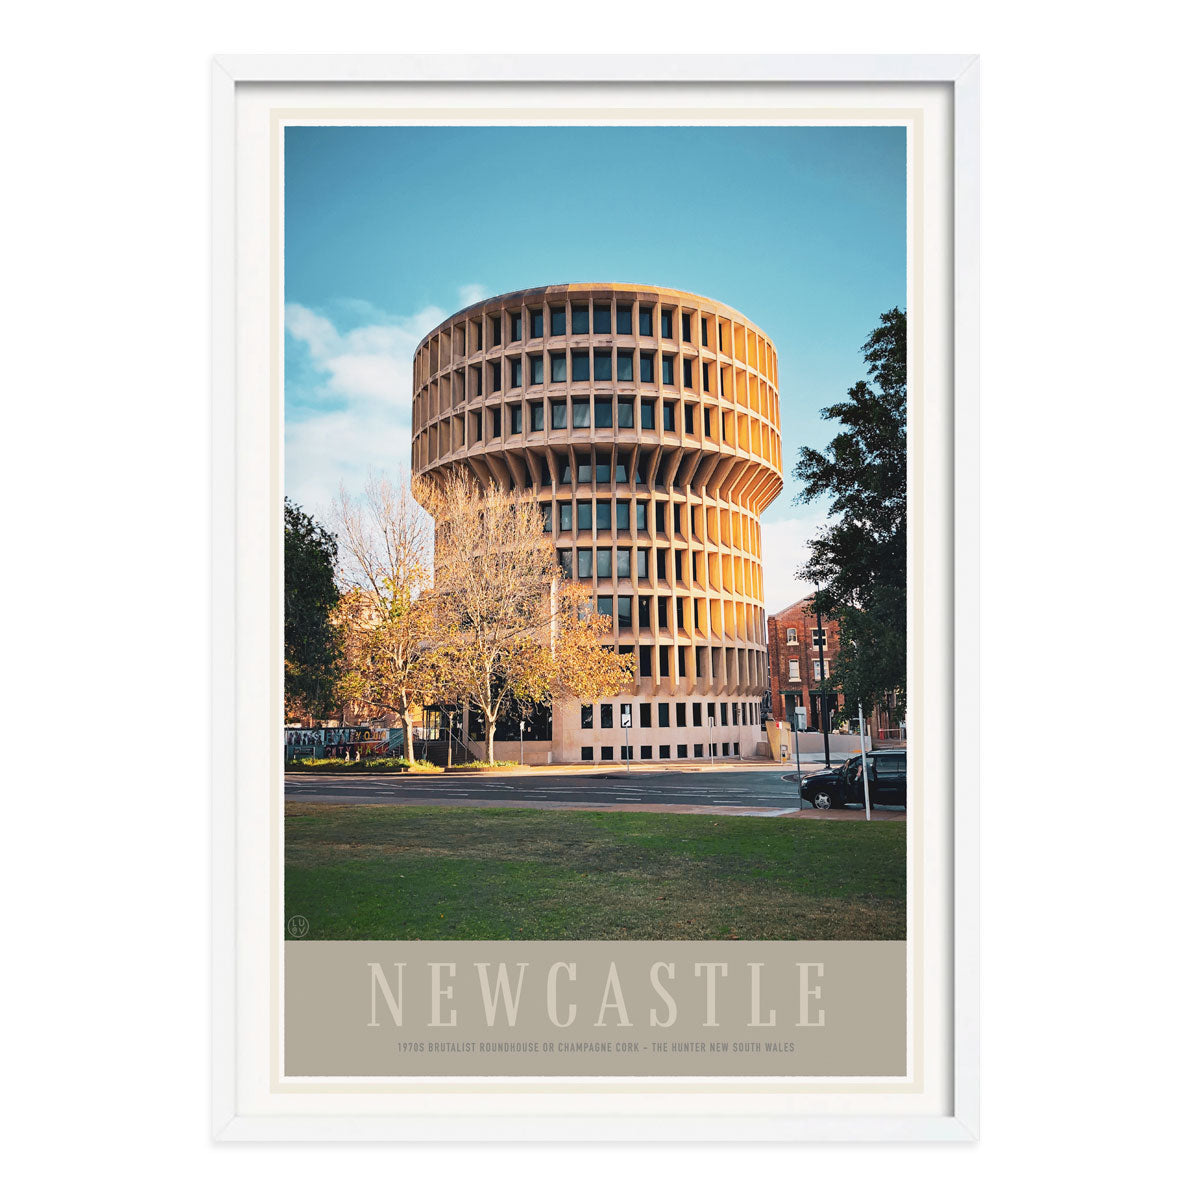 Newcastle NSW vintage retro travel poster print from Places We Luv